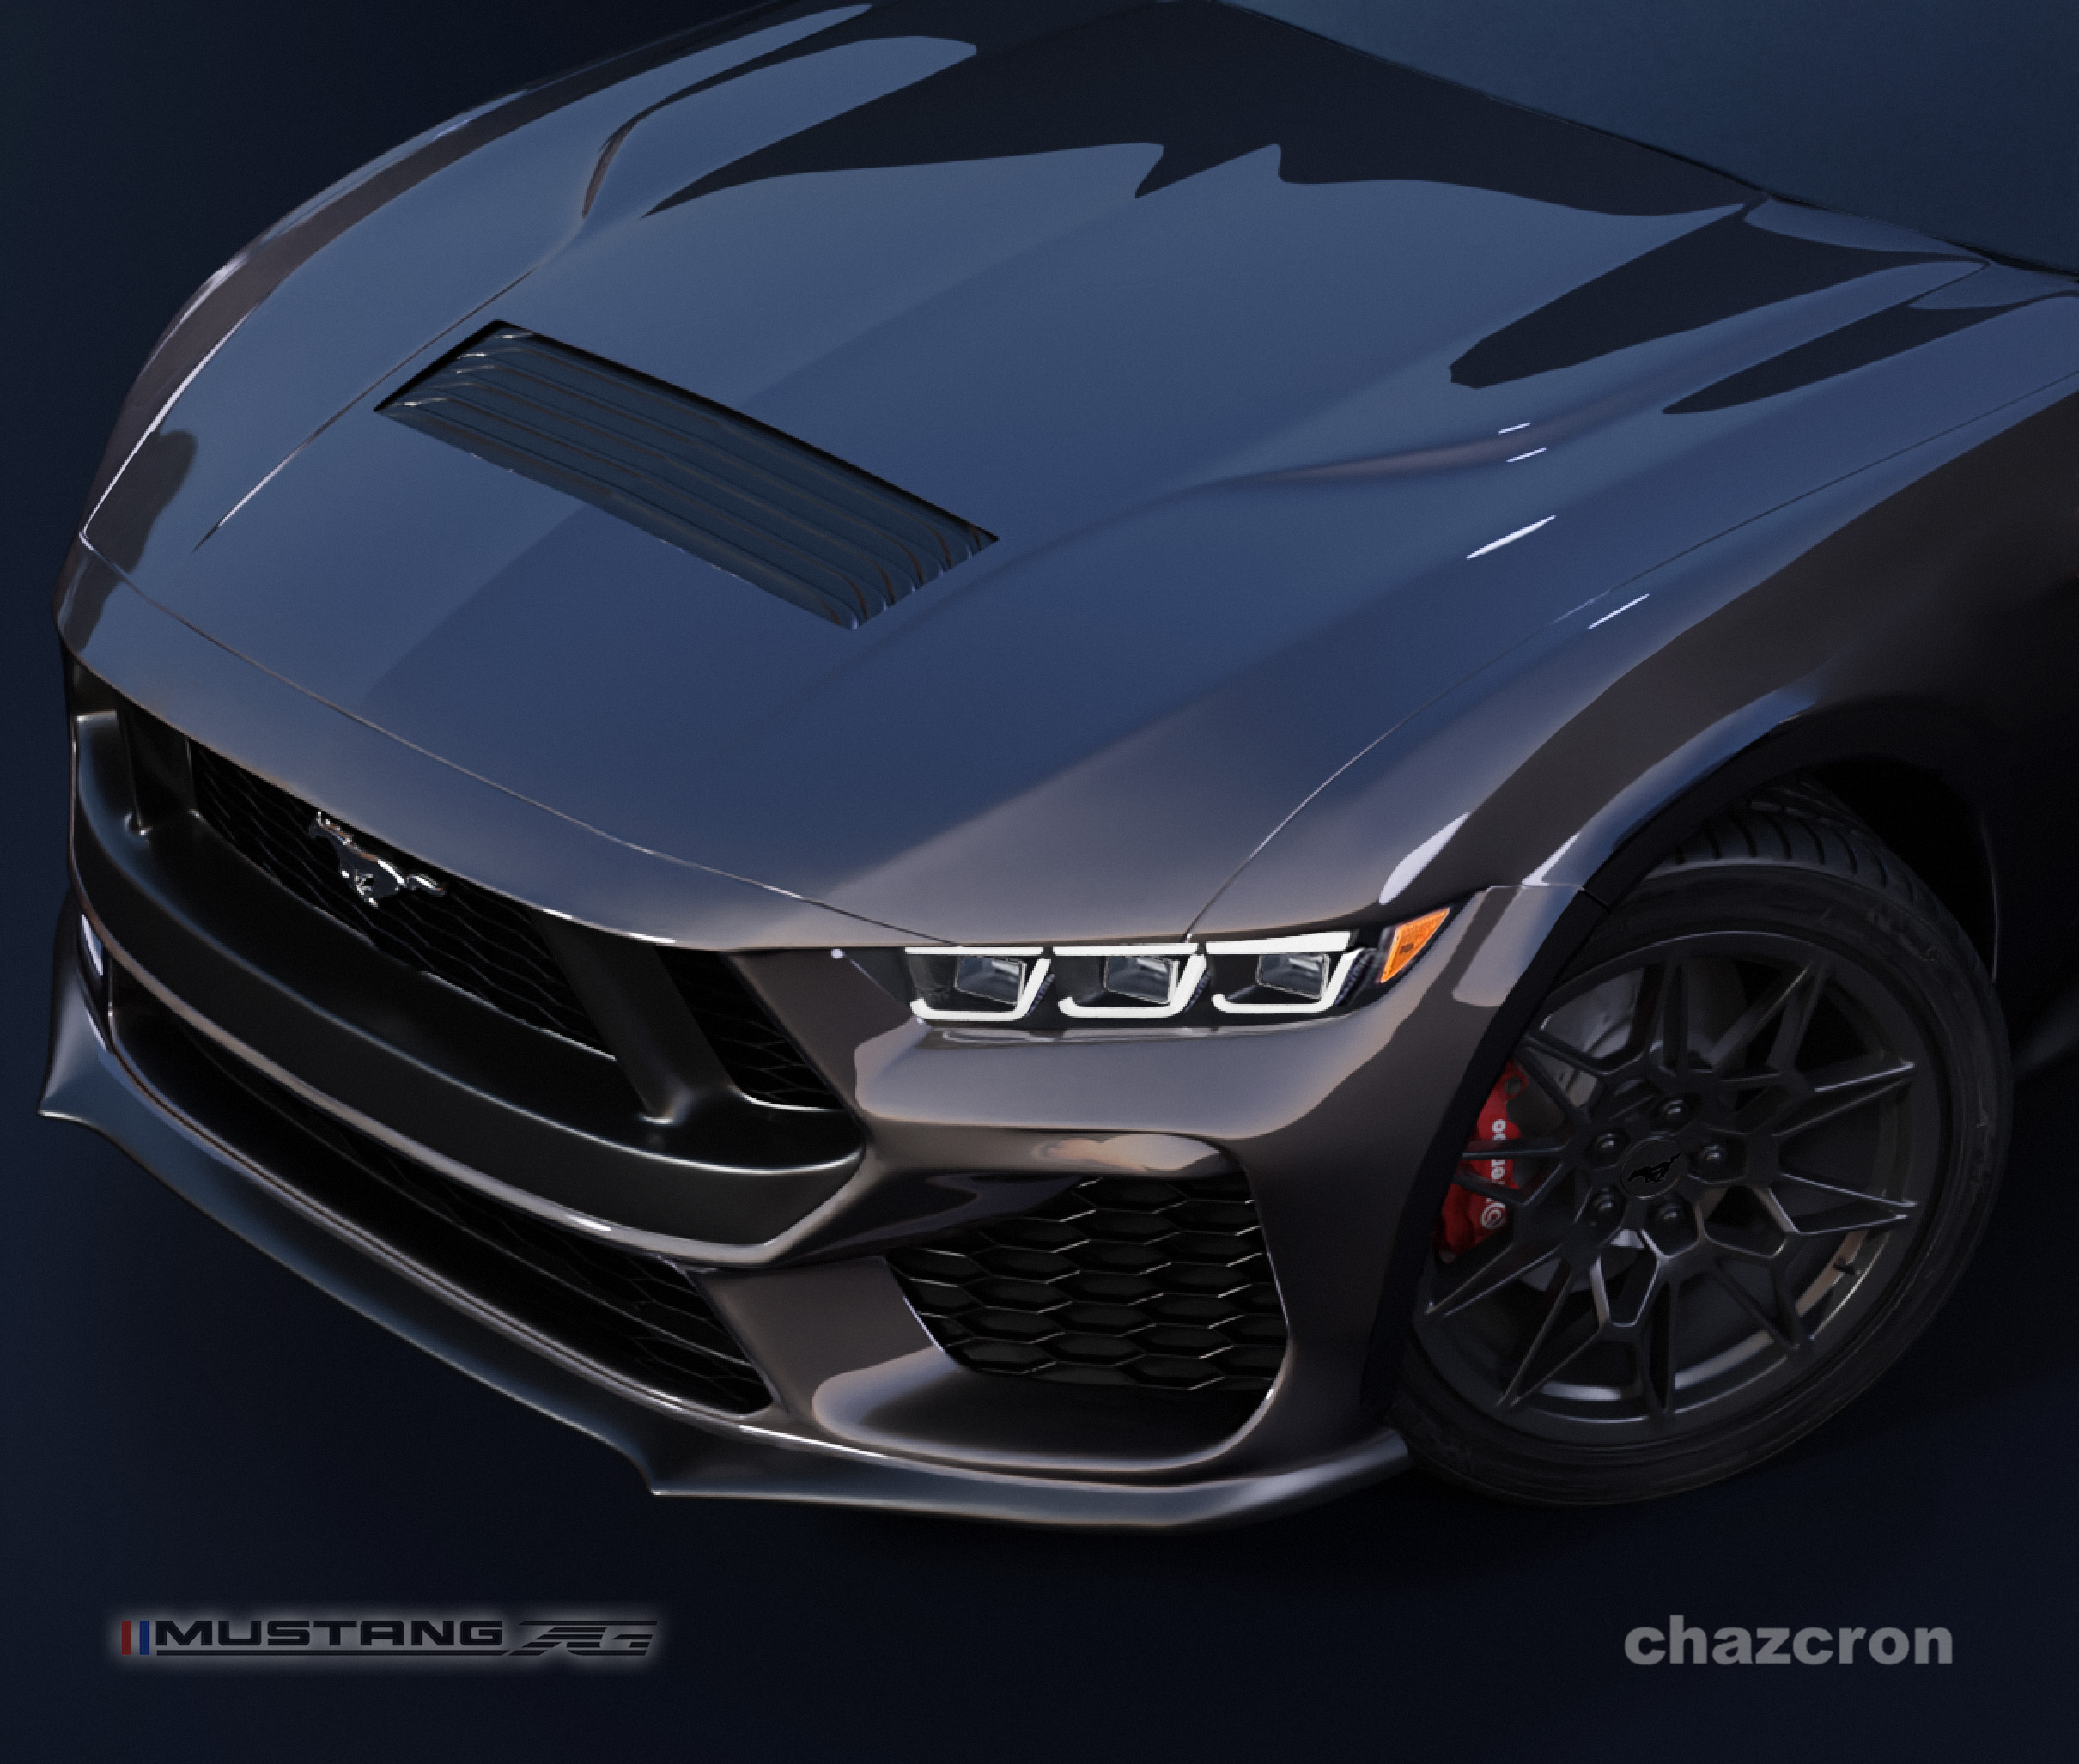 S650 Mustang chazcron weighs in... 7th gen 2023 Mustang S650 3D model & renderings in several colors! 1661809527160